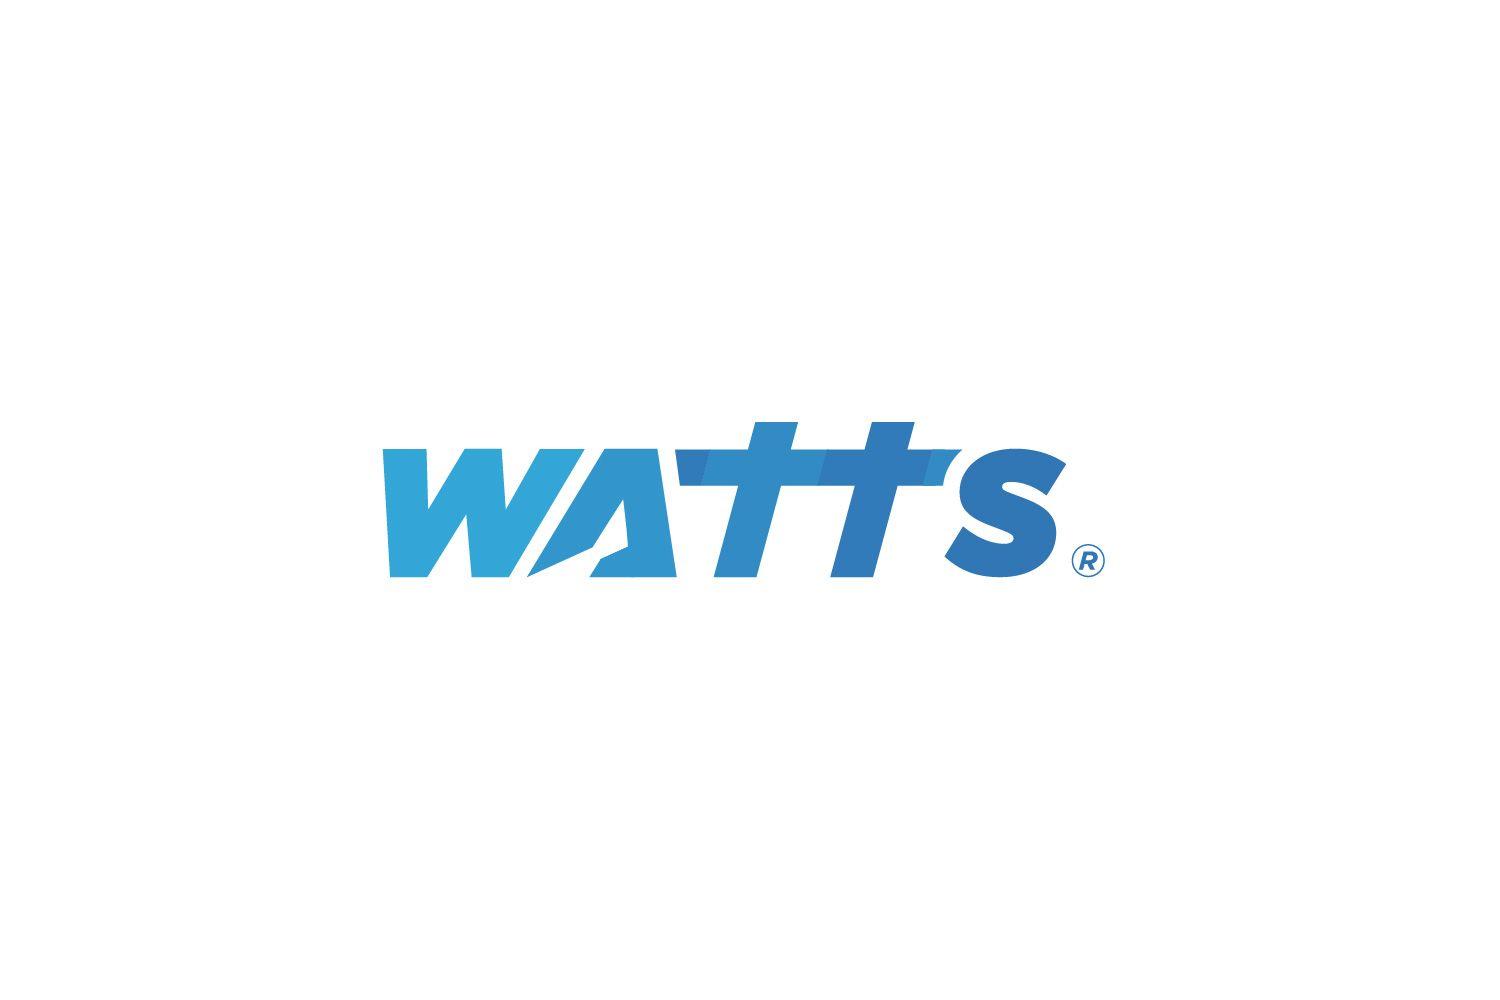 Watts Logo - Modern, Colorful Logo Design for Watts by Rzk. Design